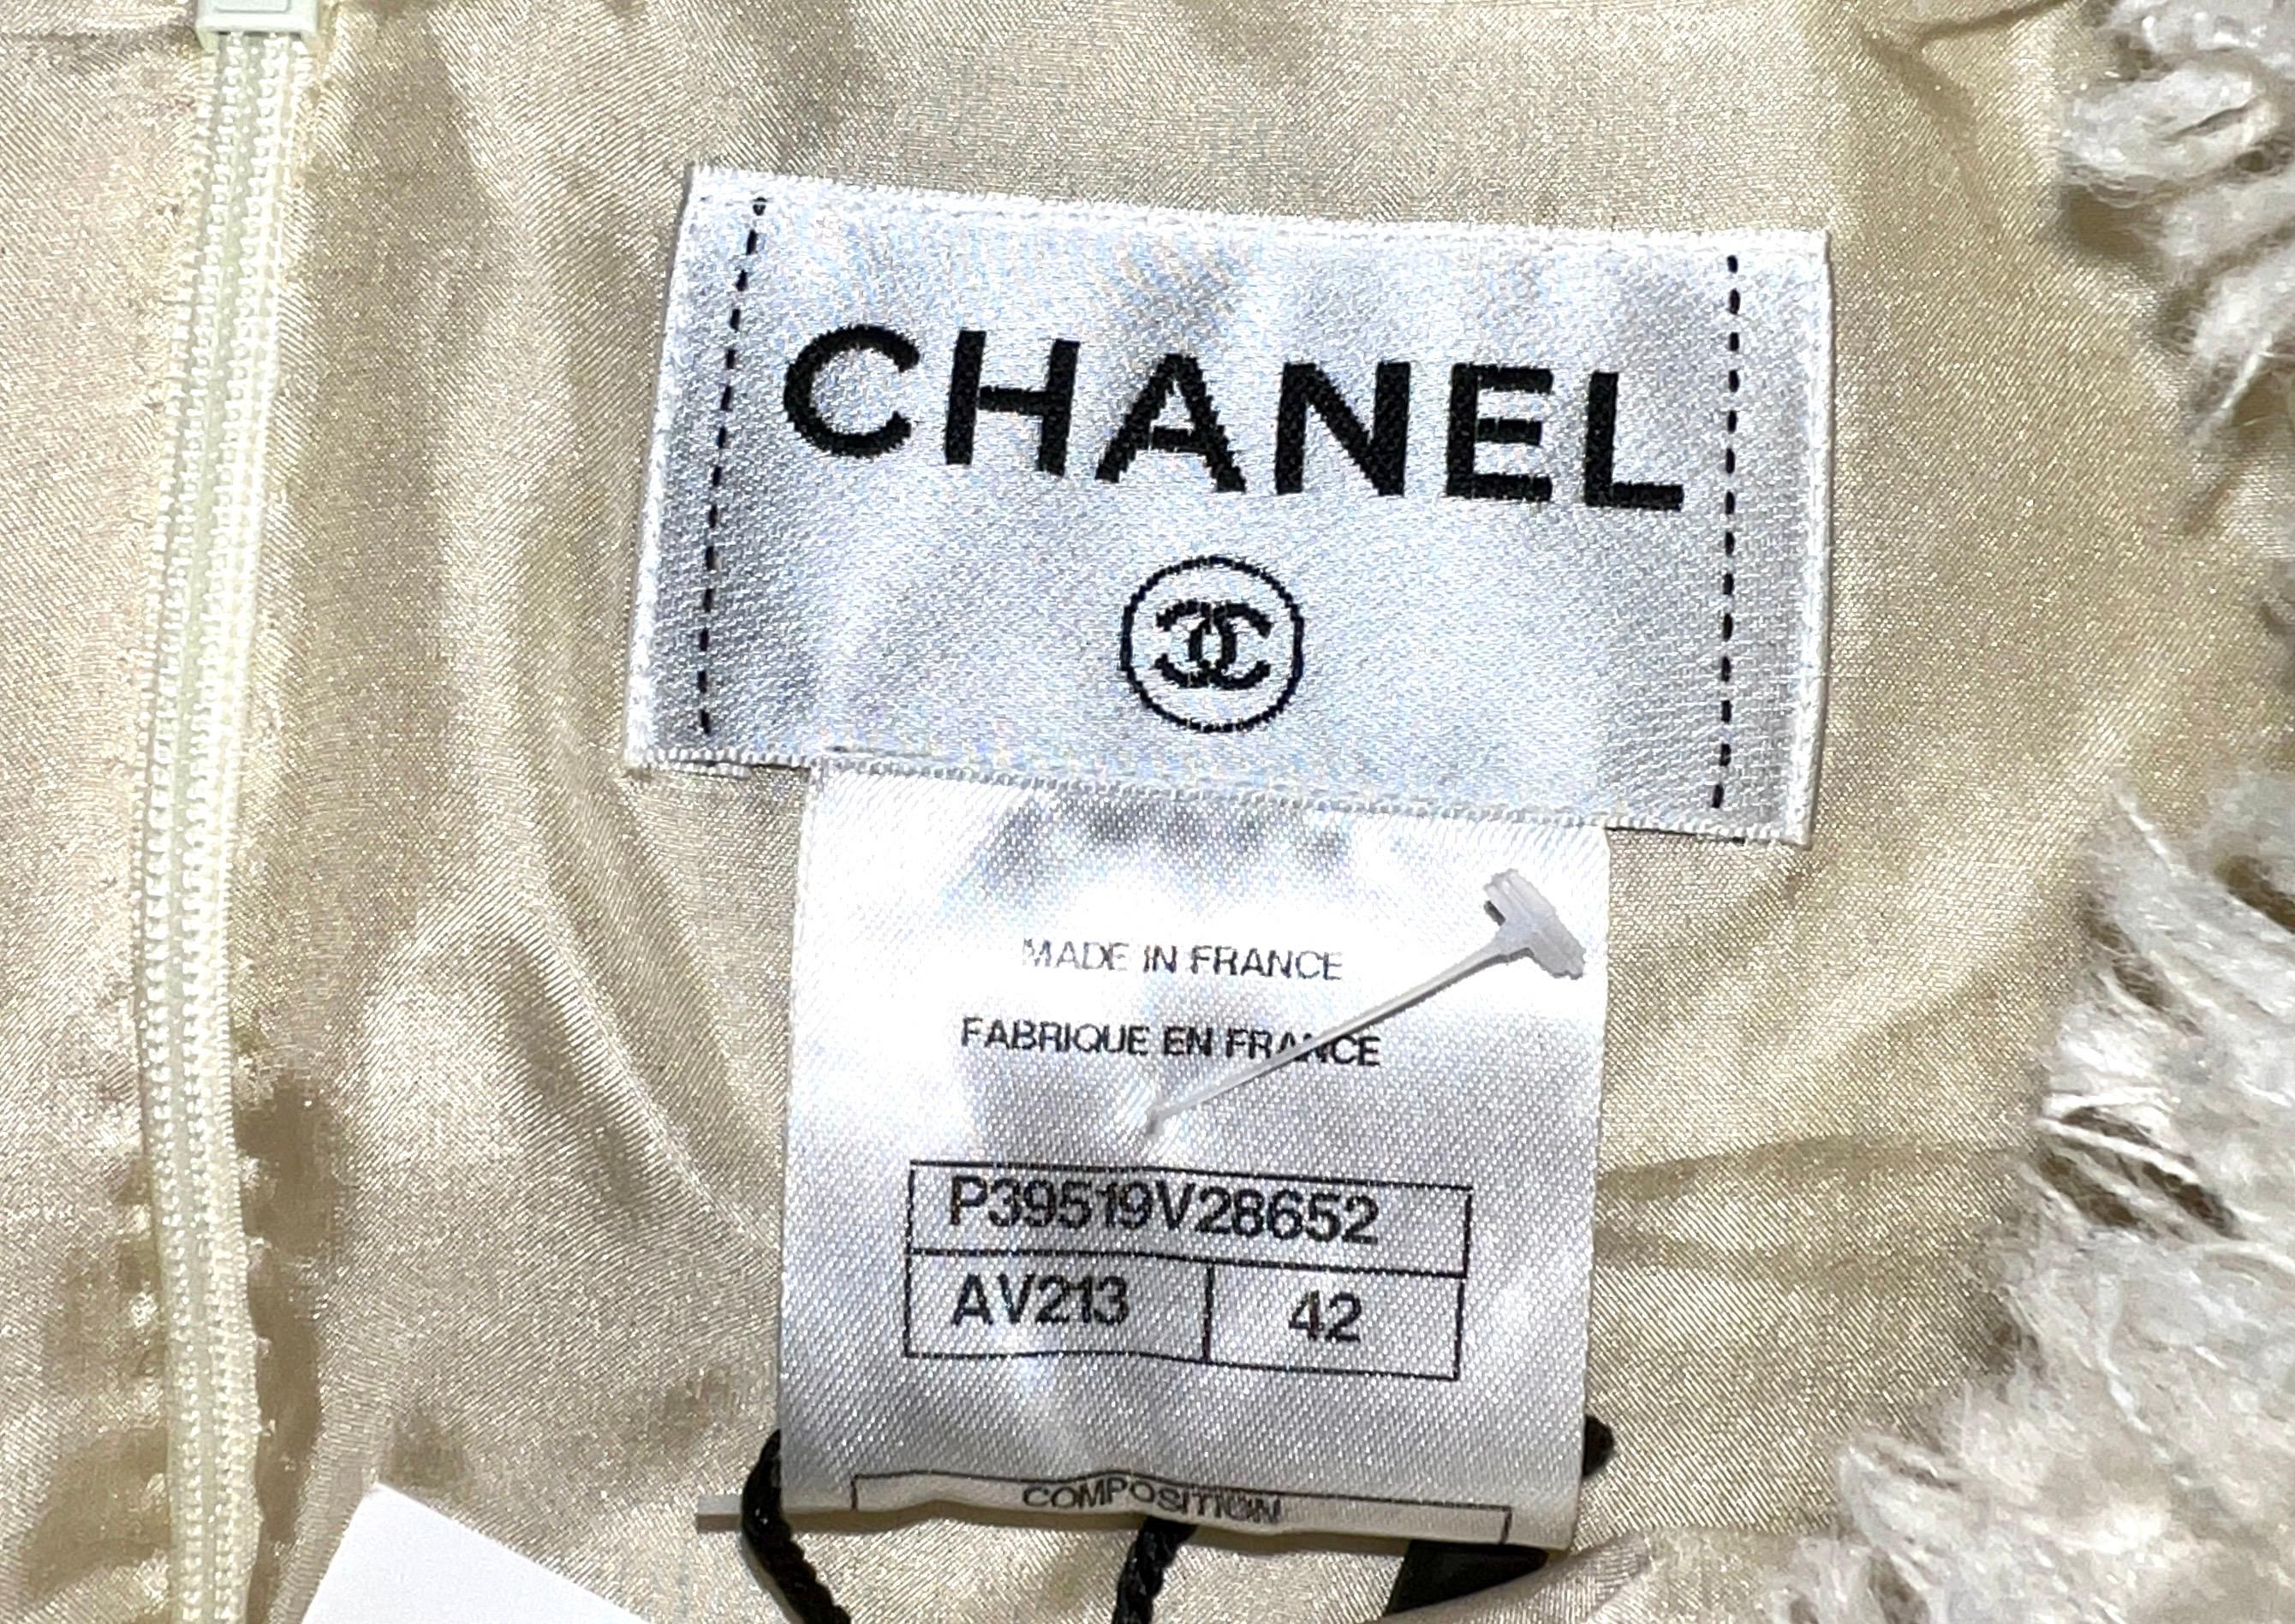 CHANEL Ivory Fantasy Frayed Tweed Dress with Pearl Trimmings and Fringe Details 6